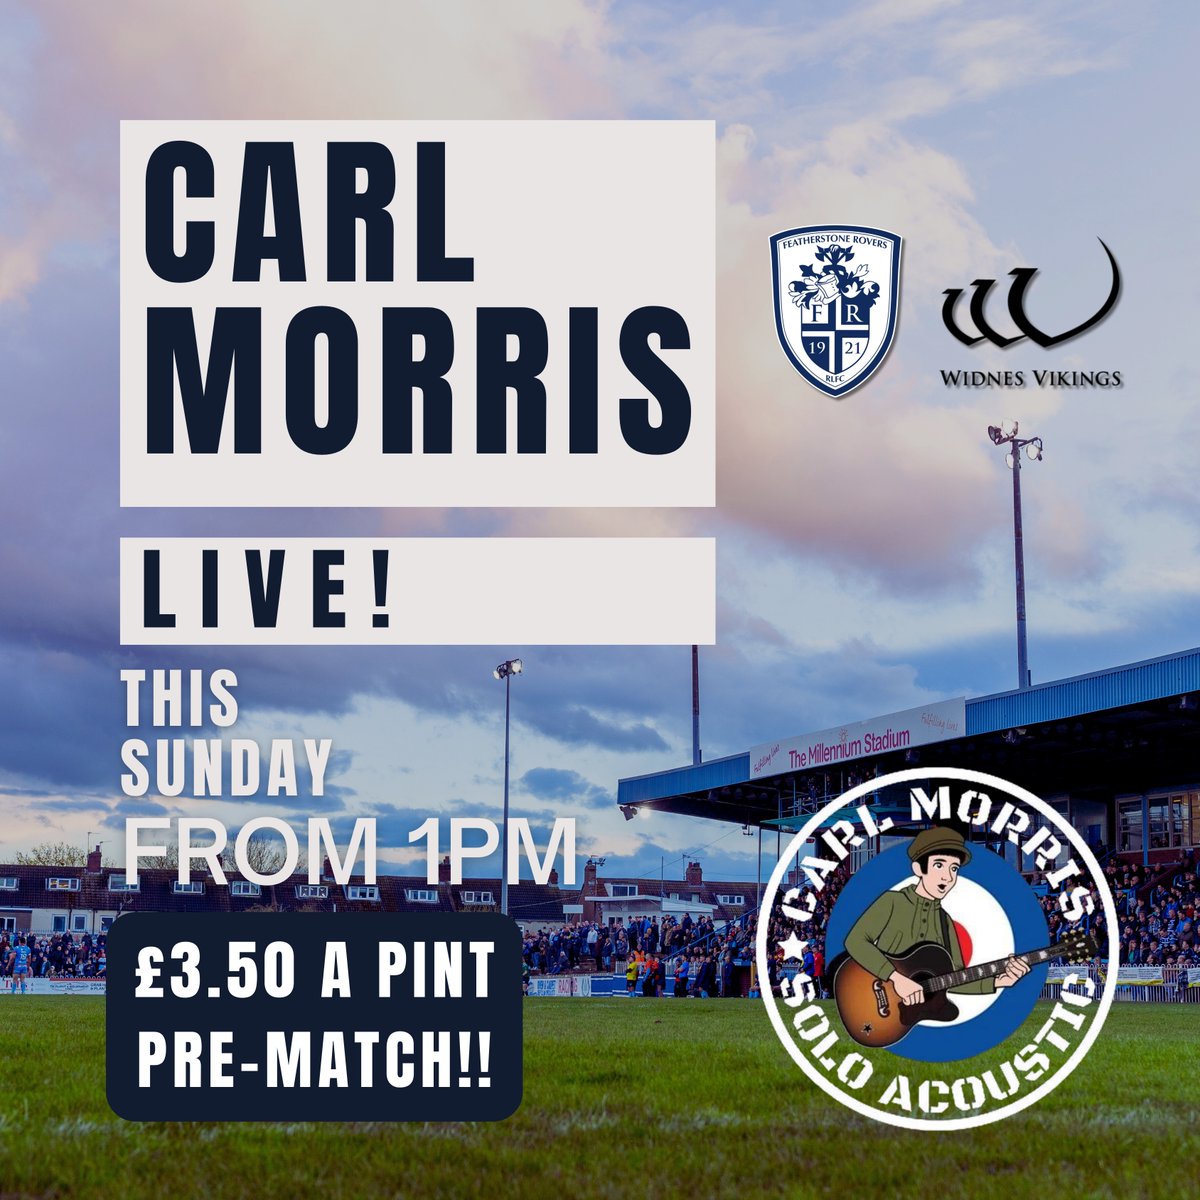 Carl Morris will be performing live in the FanZone this Sunday ‼️

⏰ 1.15pm until 2pm
⏰ 2.15pm until 3pm

Support your club and get down to the Millennium Stadium nice and early!

🎤 Best pre-match entertainment in Fev
🍻 Cheapest pre-match pint in Fev

#BlueWall